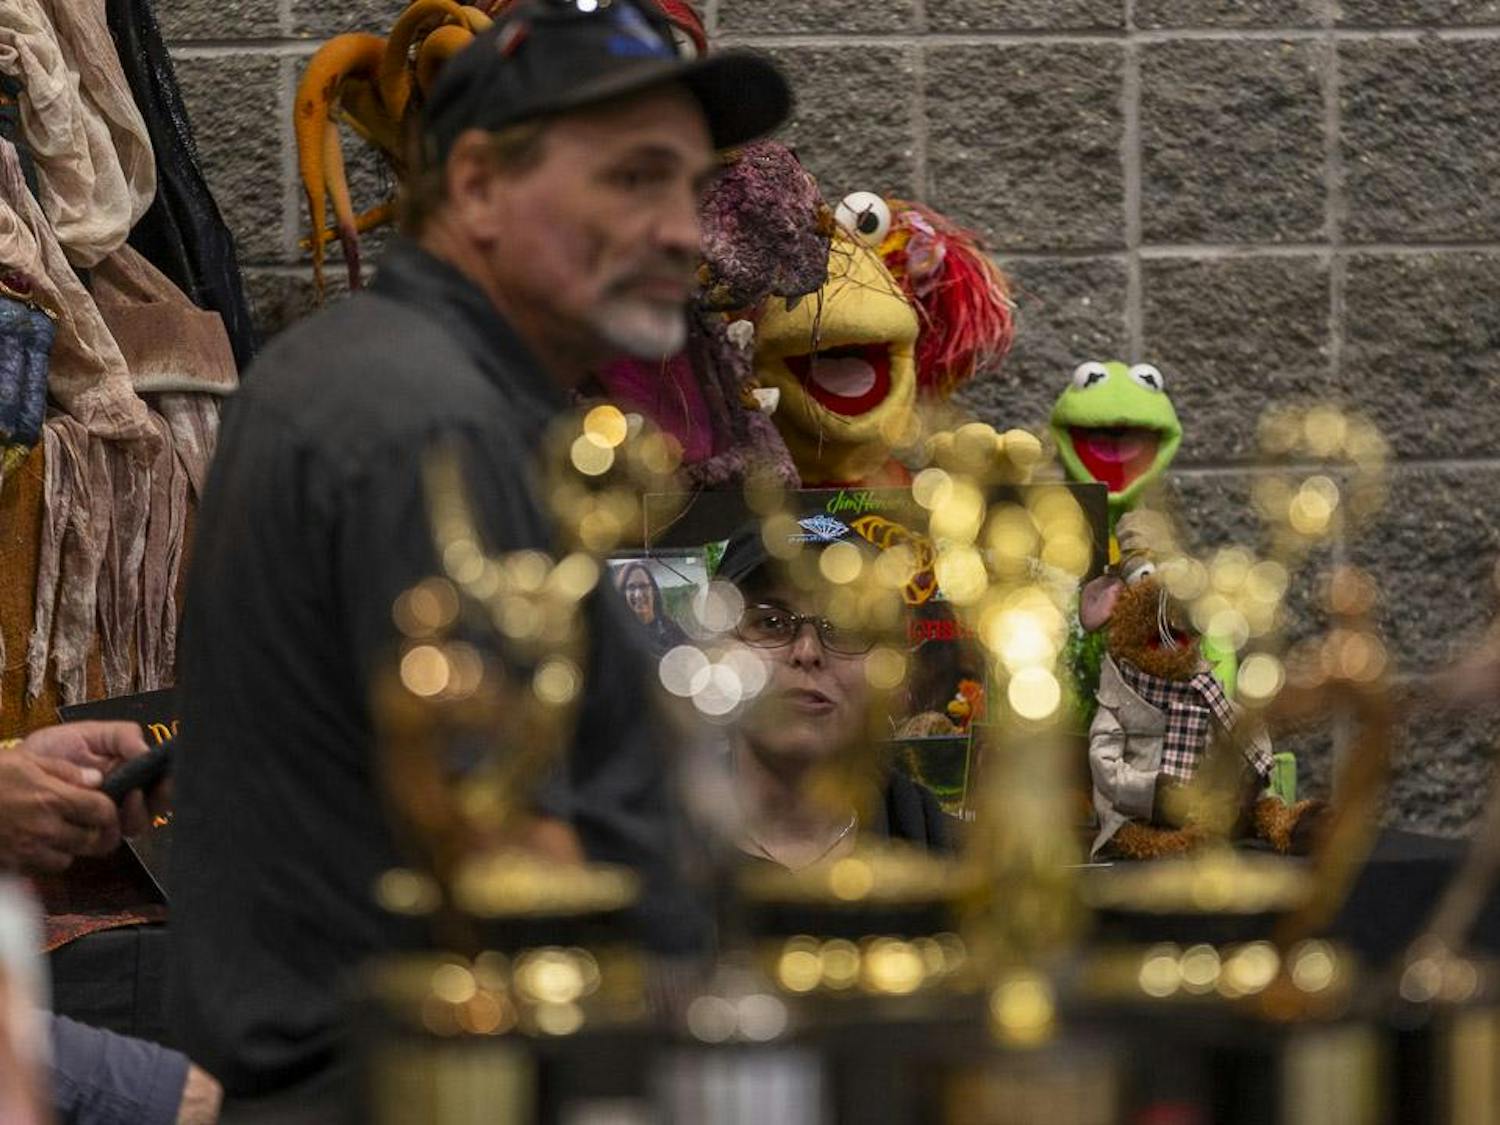 Red Fraggle from "Fraggle Rock" (left) and Kermit the Frog (right) sit in the background of the Bill Diamond Productions booth at the South Carolina Horror Convention on September 16, 2023. Bill Diamond, seen in the foreground, is an award artist, puppeteer and producer who has worked on a plethora of films and television shows including "The Muppets," "Little Shop of Horrors" and "Dark Crystal."